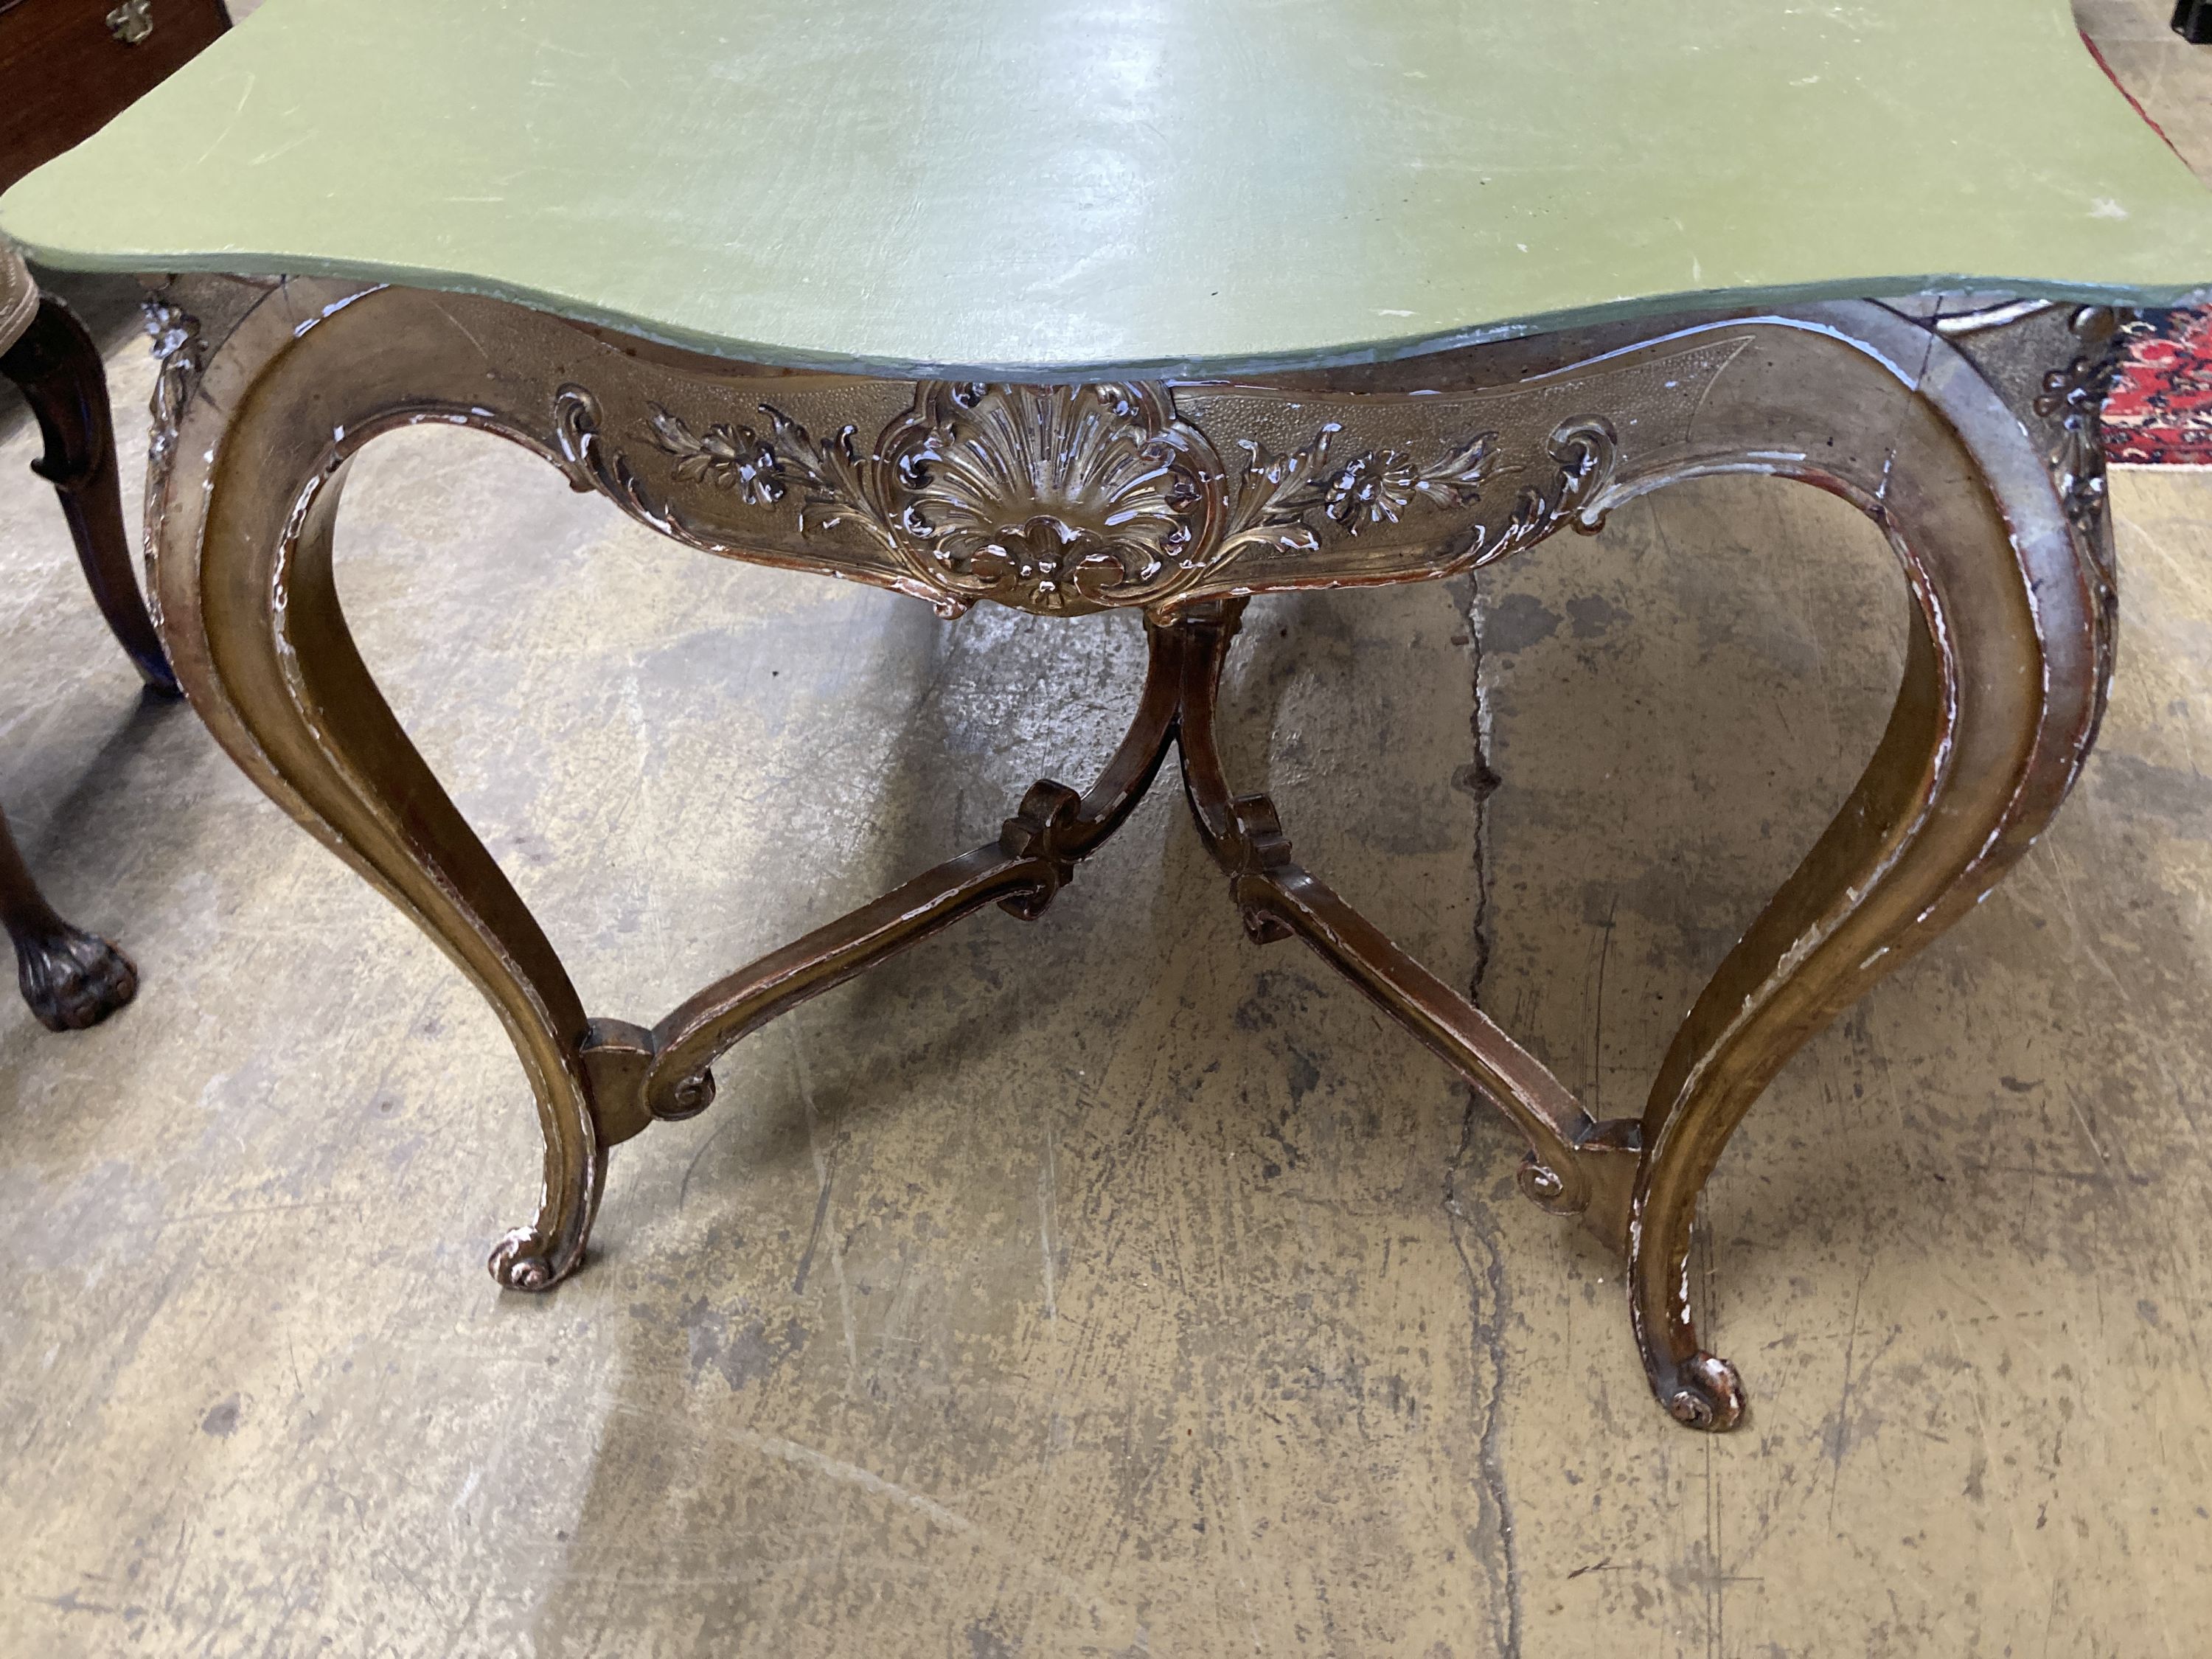 A large 19th century gilt carved wood and plaster cente table (lacking top), width 150cm, depth 85cm, height 72cm